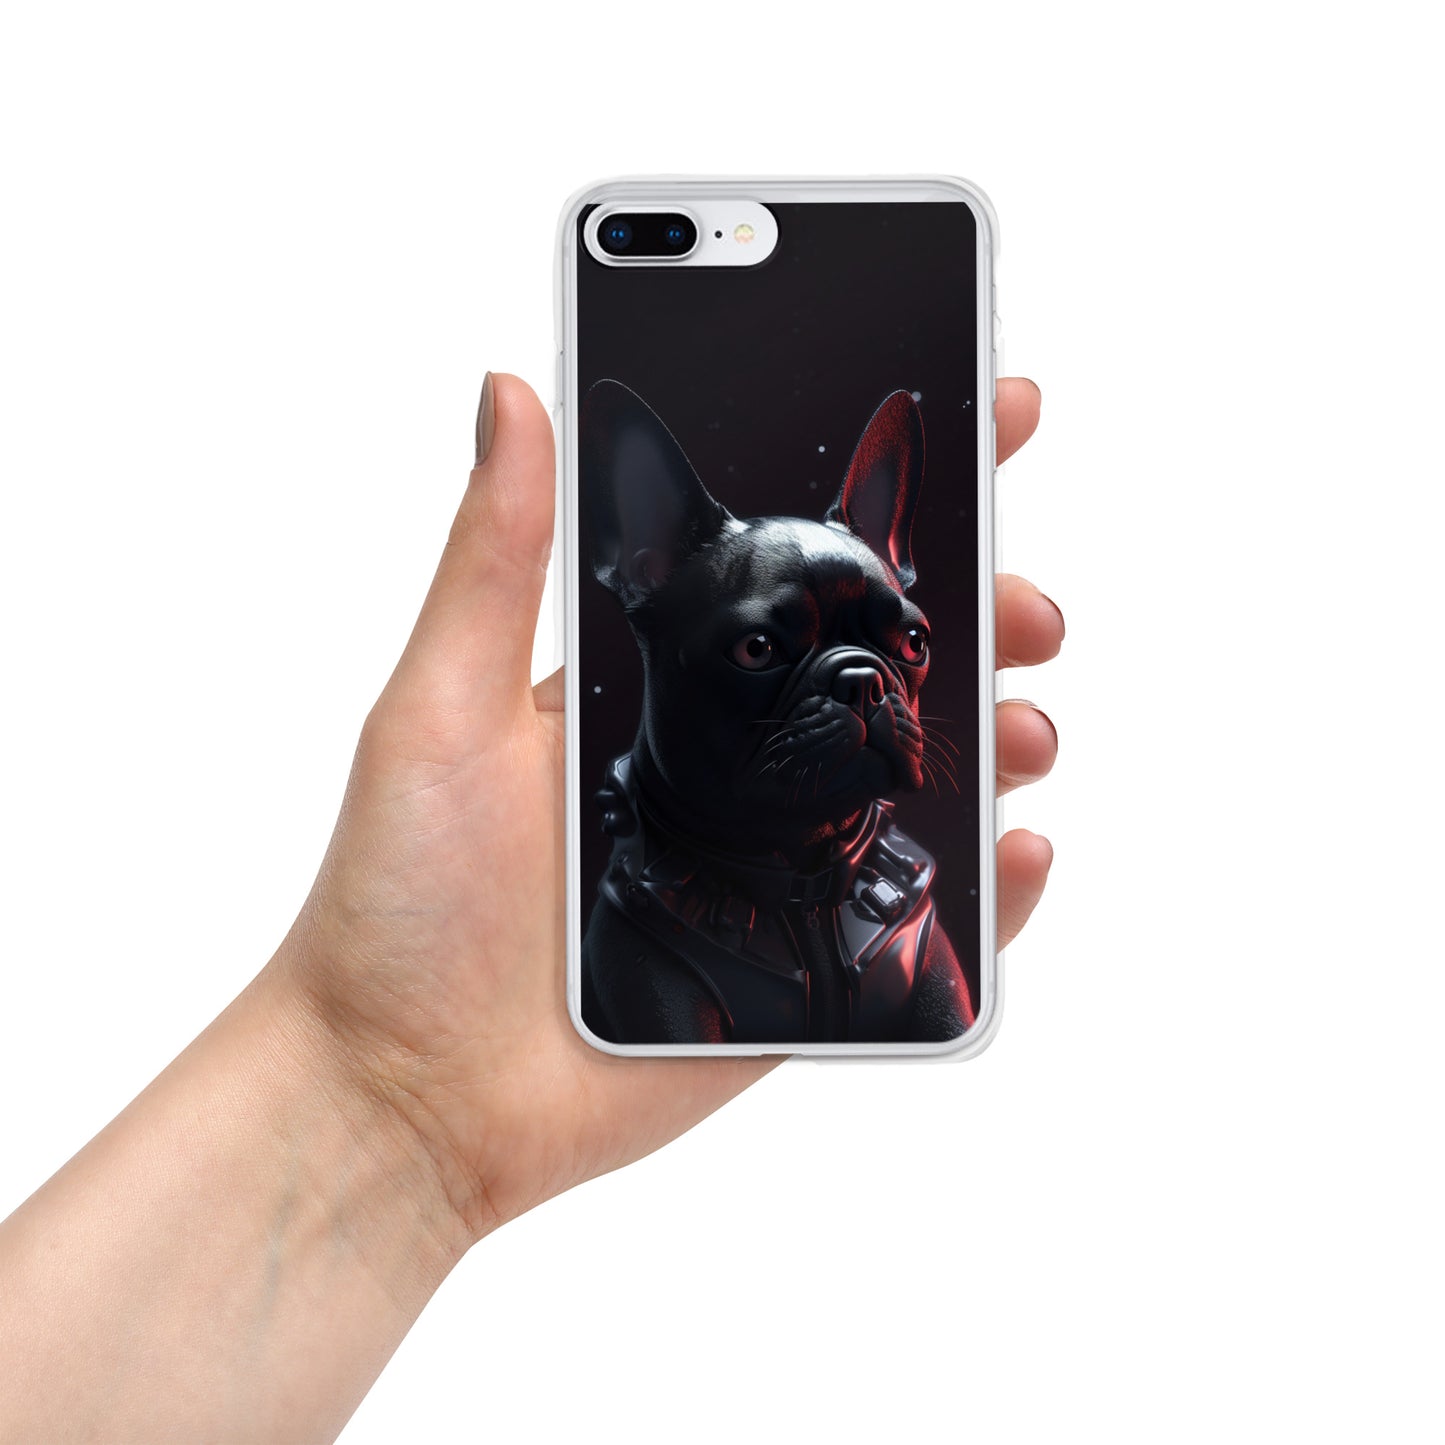 Frenchie Style iPhone Case - Premium Protection with an Artistic Touch